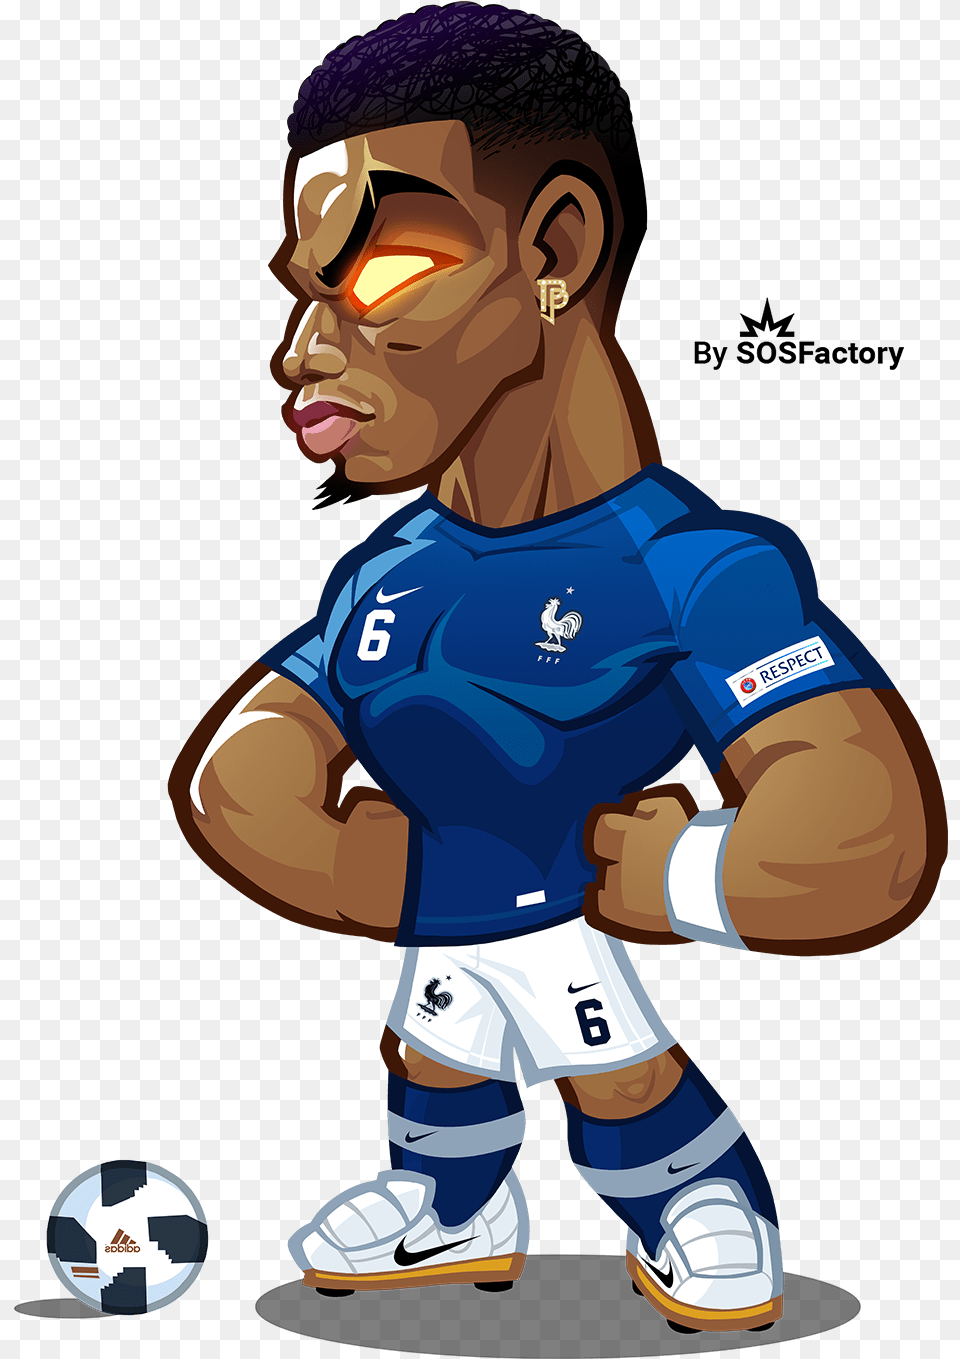 Worldcup Russia Mascotization Project Paul Pogba Caricature Worldcup Russia 2018 Mascotization, Ball, Soccer Ball, Soccer, Sport Png